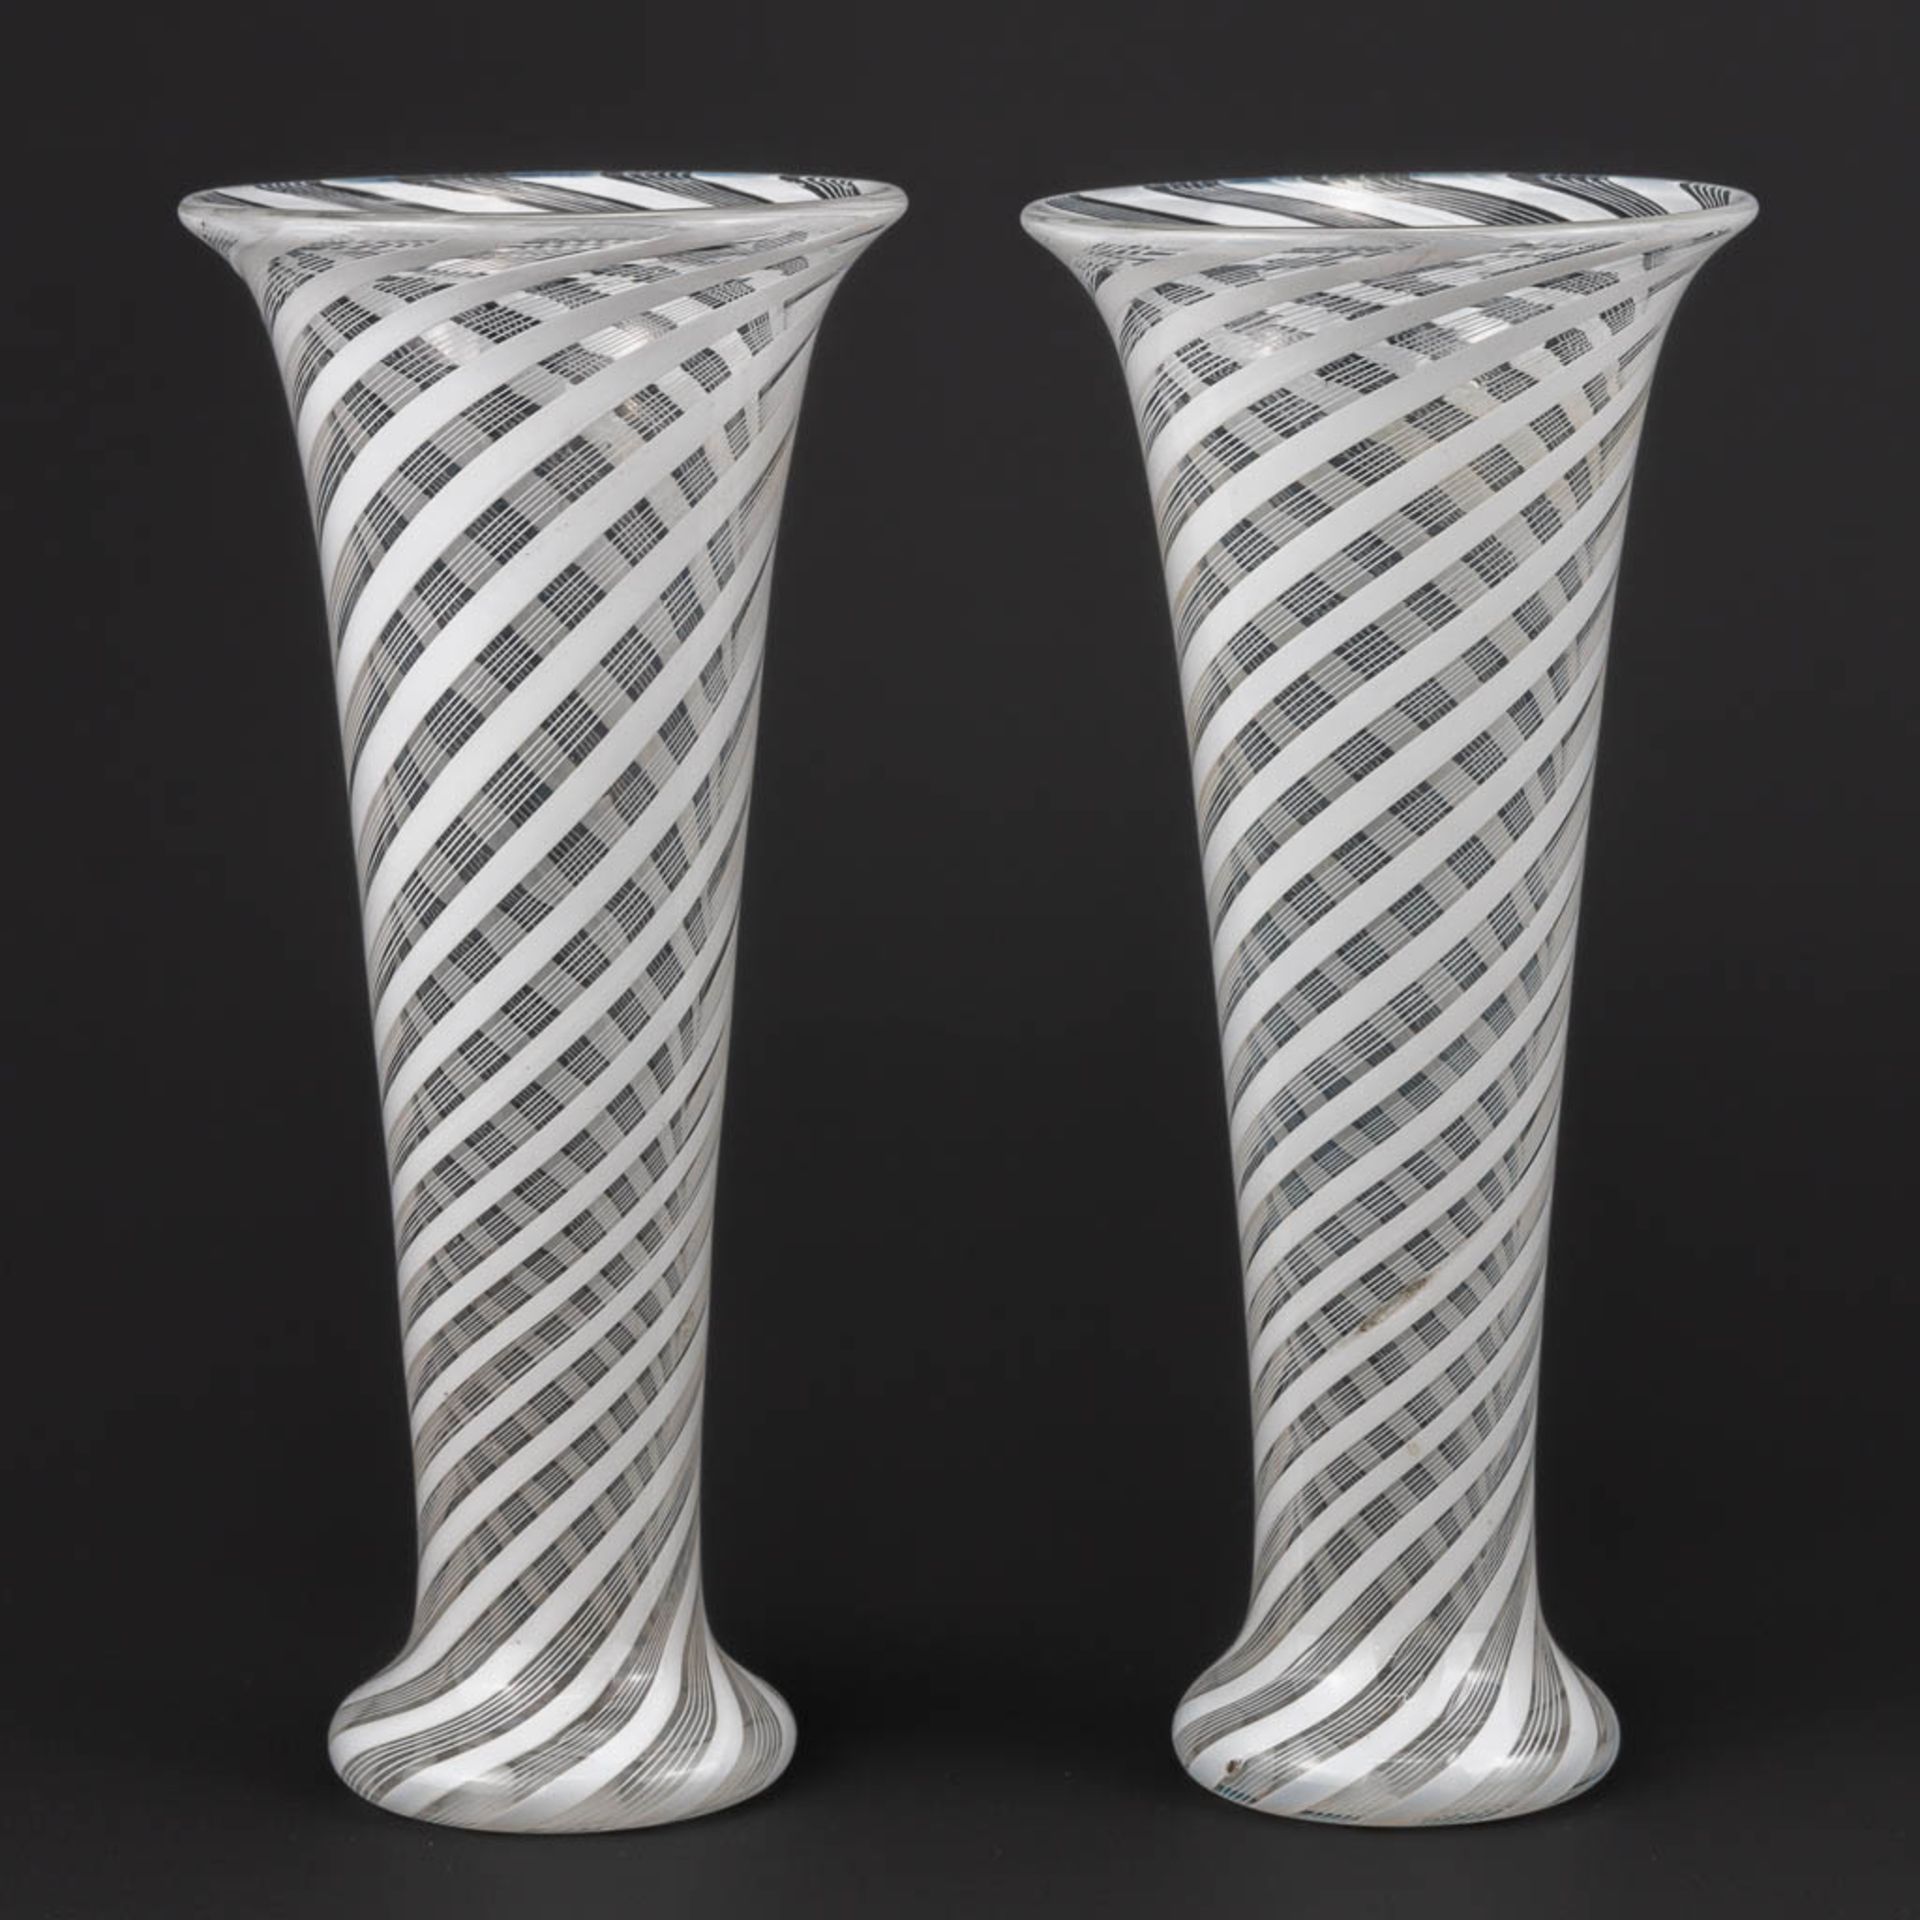 A pair of vases made of glass in Murano, Italy, around 1900. (16 x 7 cm)